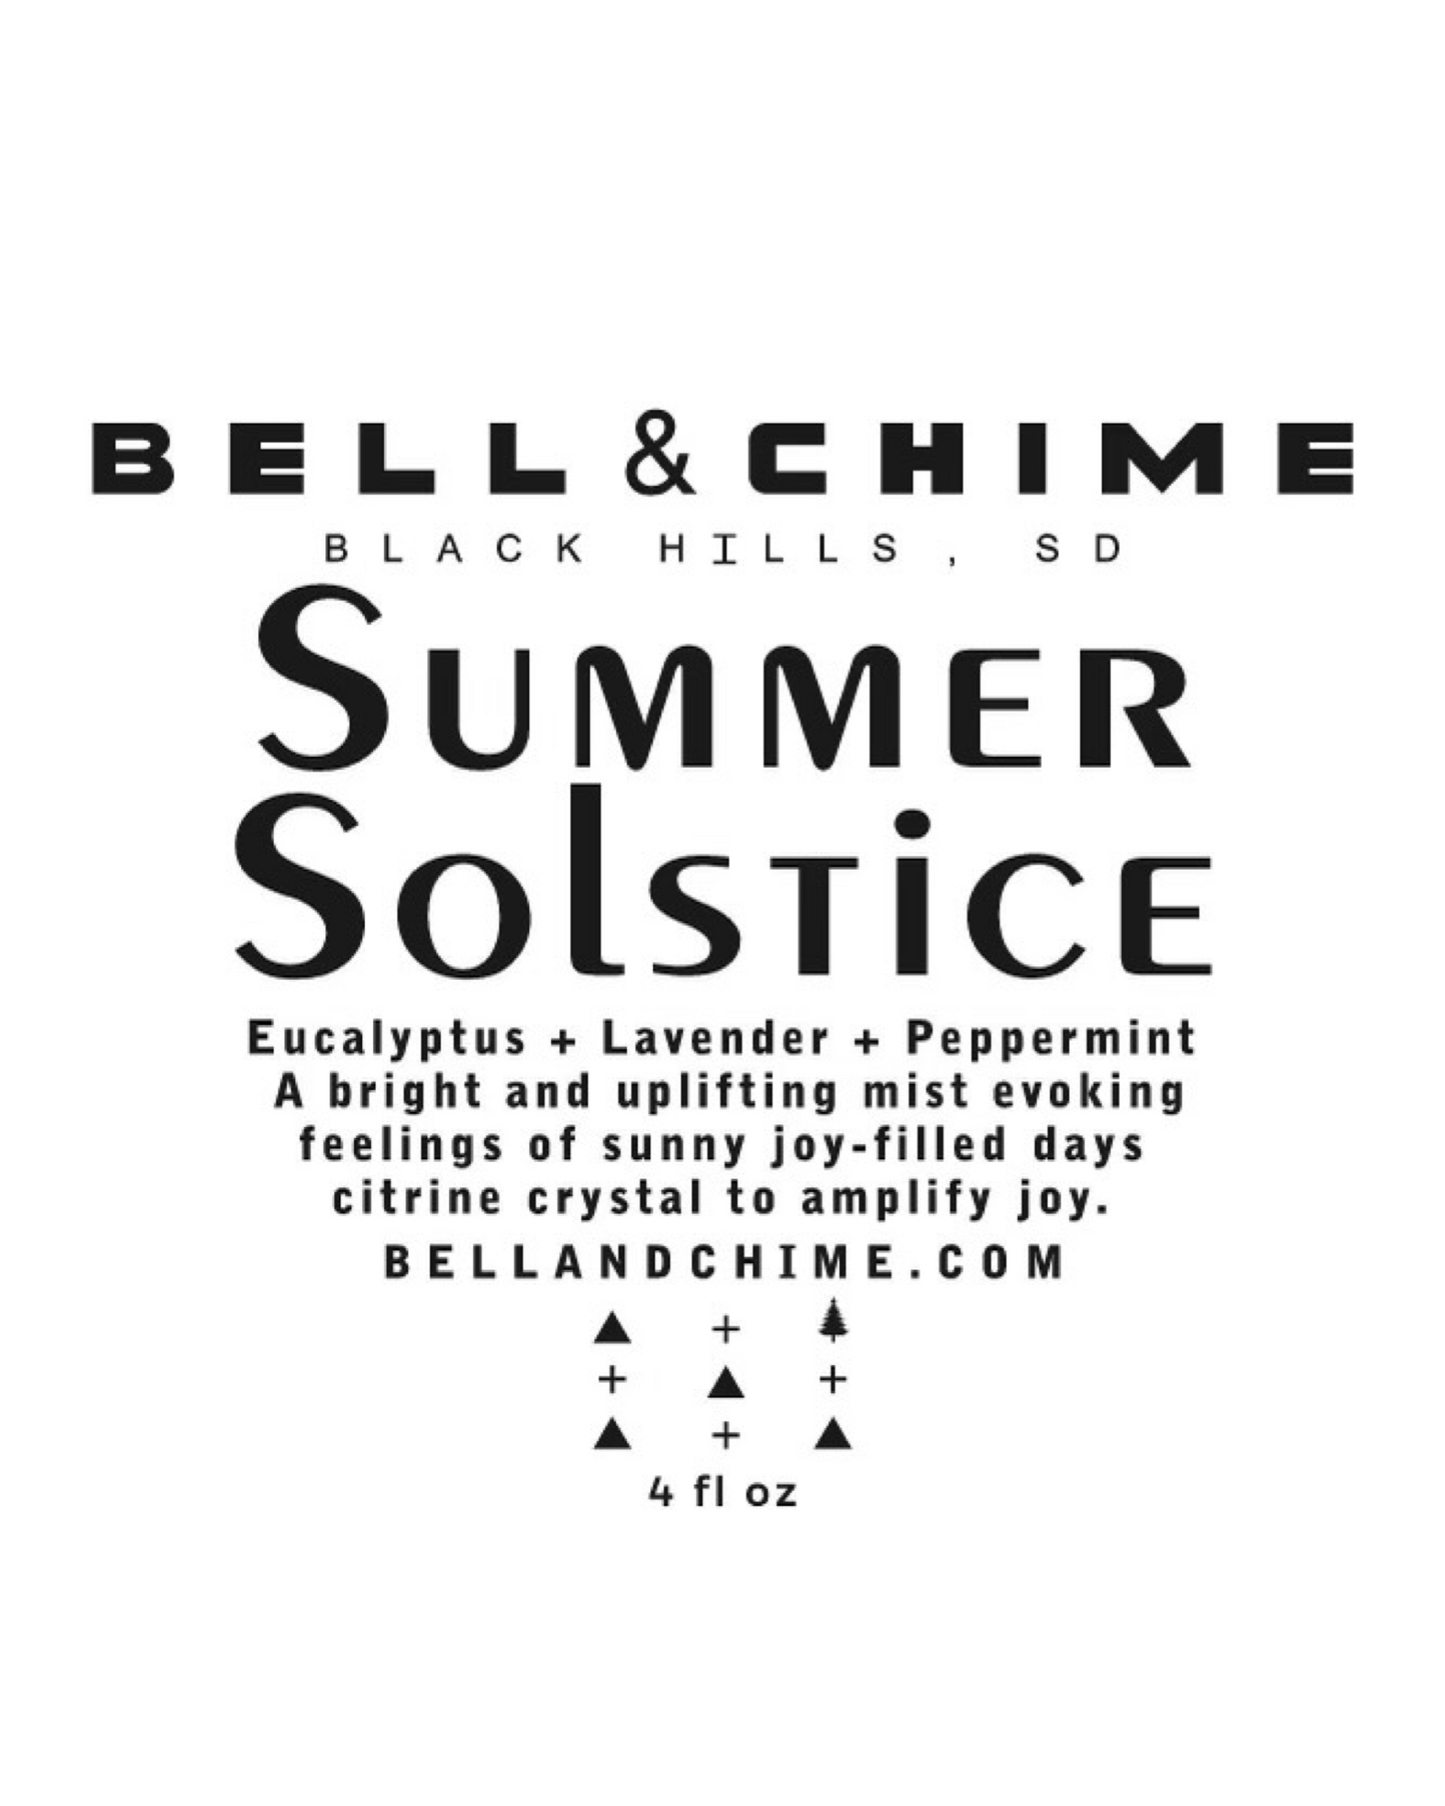 Bell & Chime: Black Hills, SD "Summer Solstice," Eucalyptus + Lavender + Peppermint, A bright and uplifting mist evoking feelings of sunny joy-filled days. Citrine crystals to amplify joy. 4 fl oz.